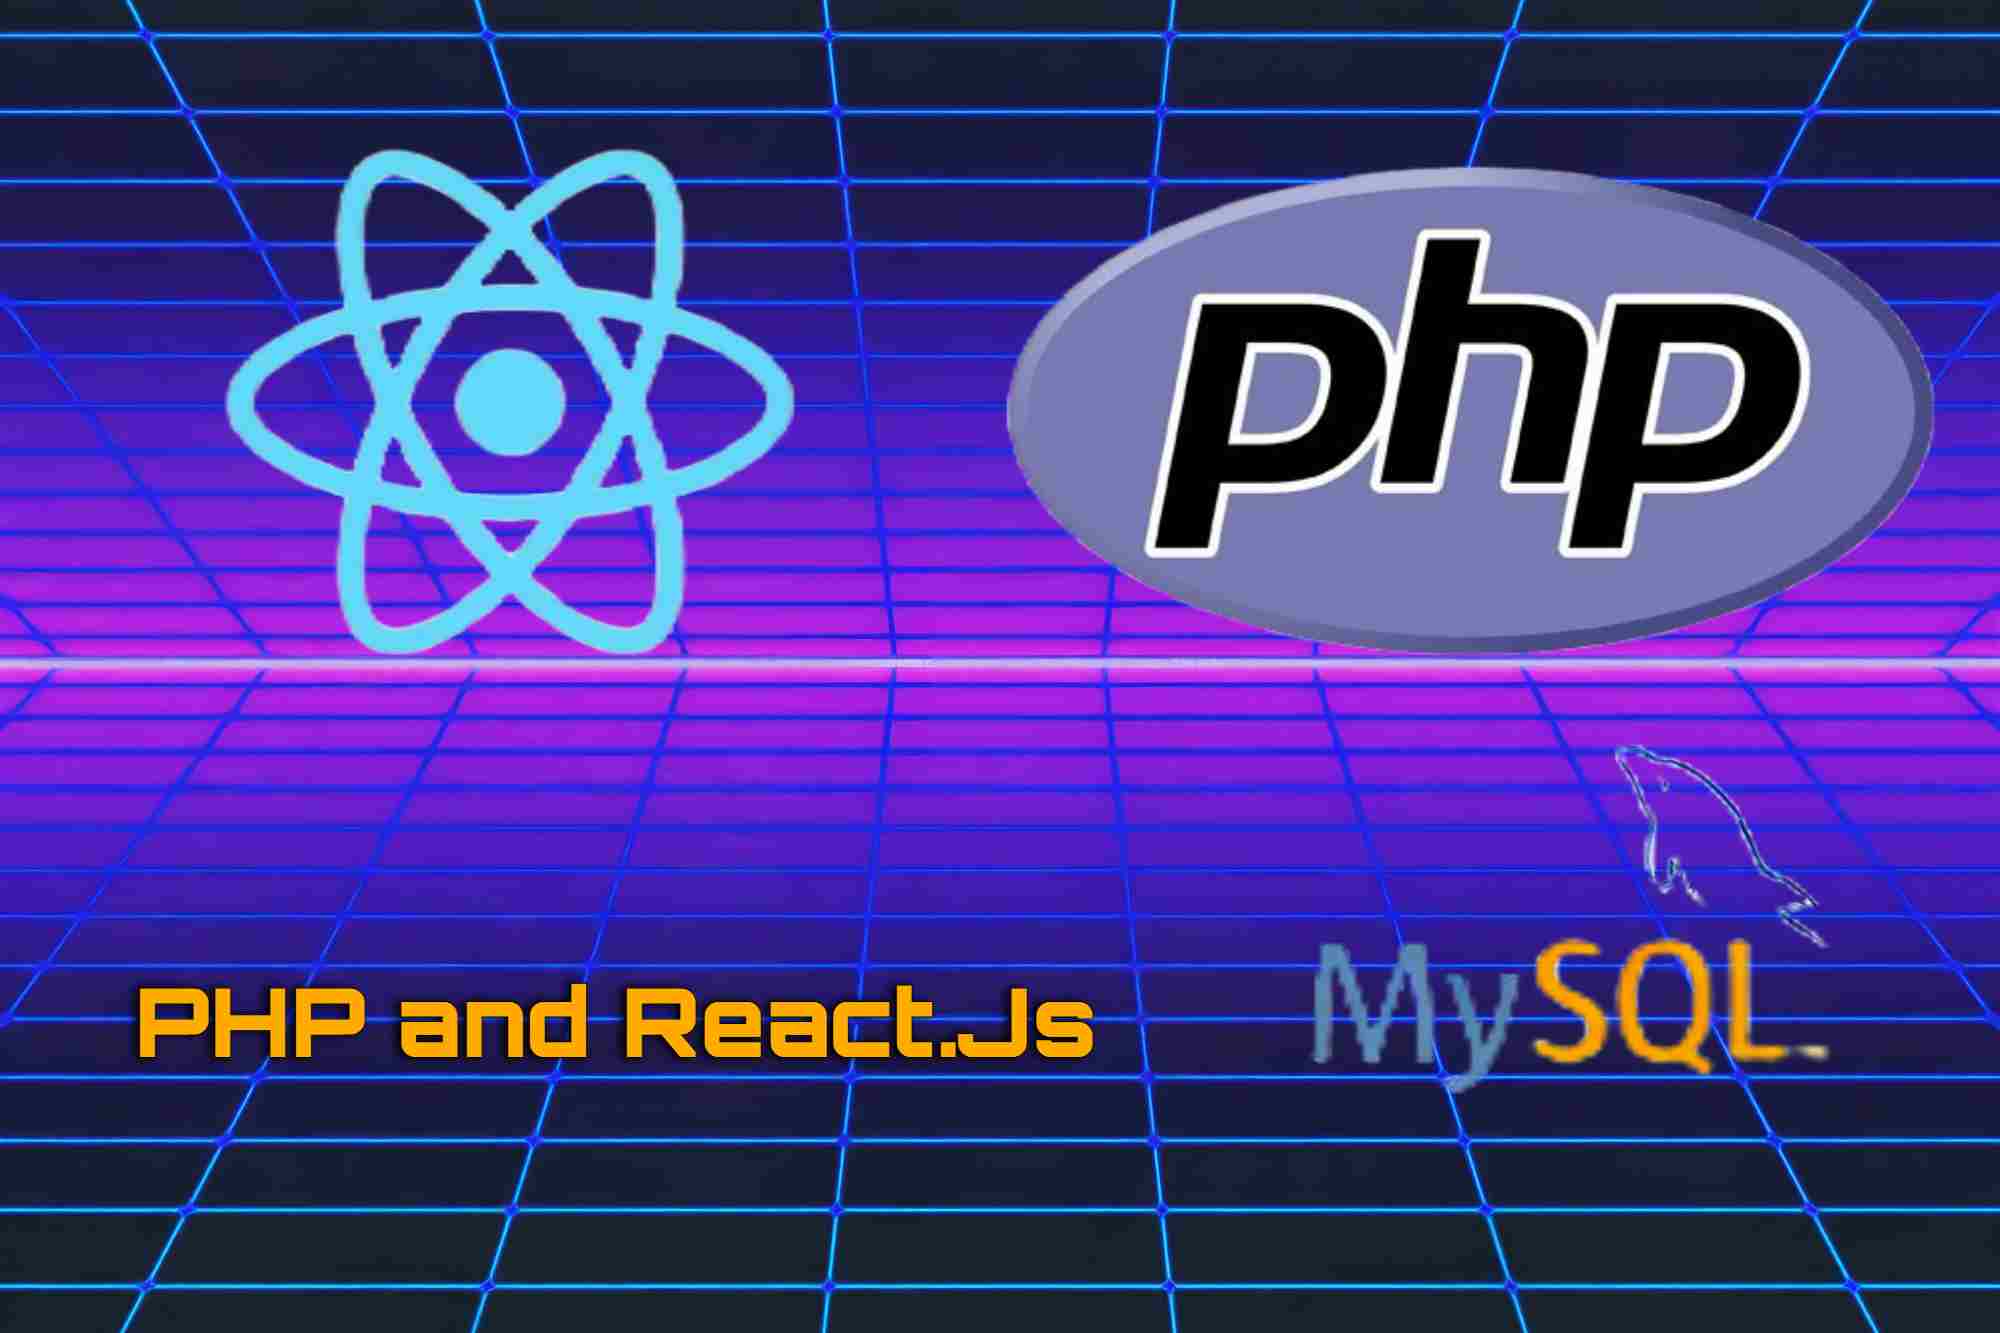 PHP and React.Js